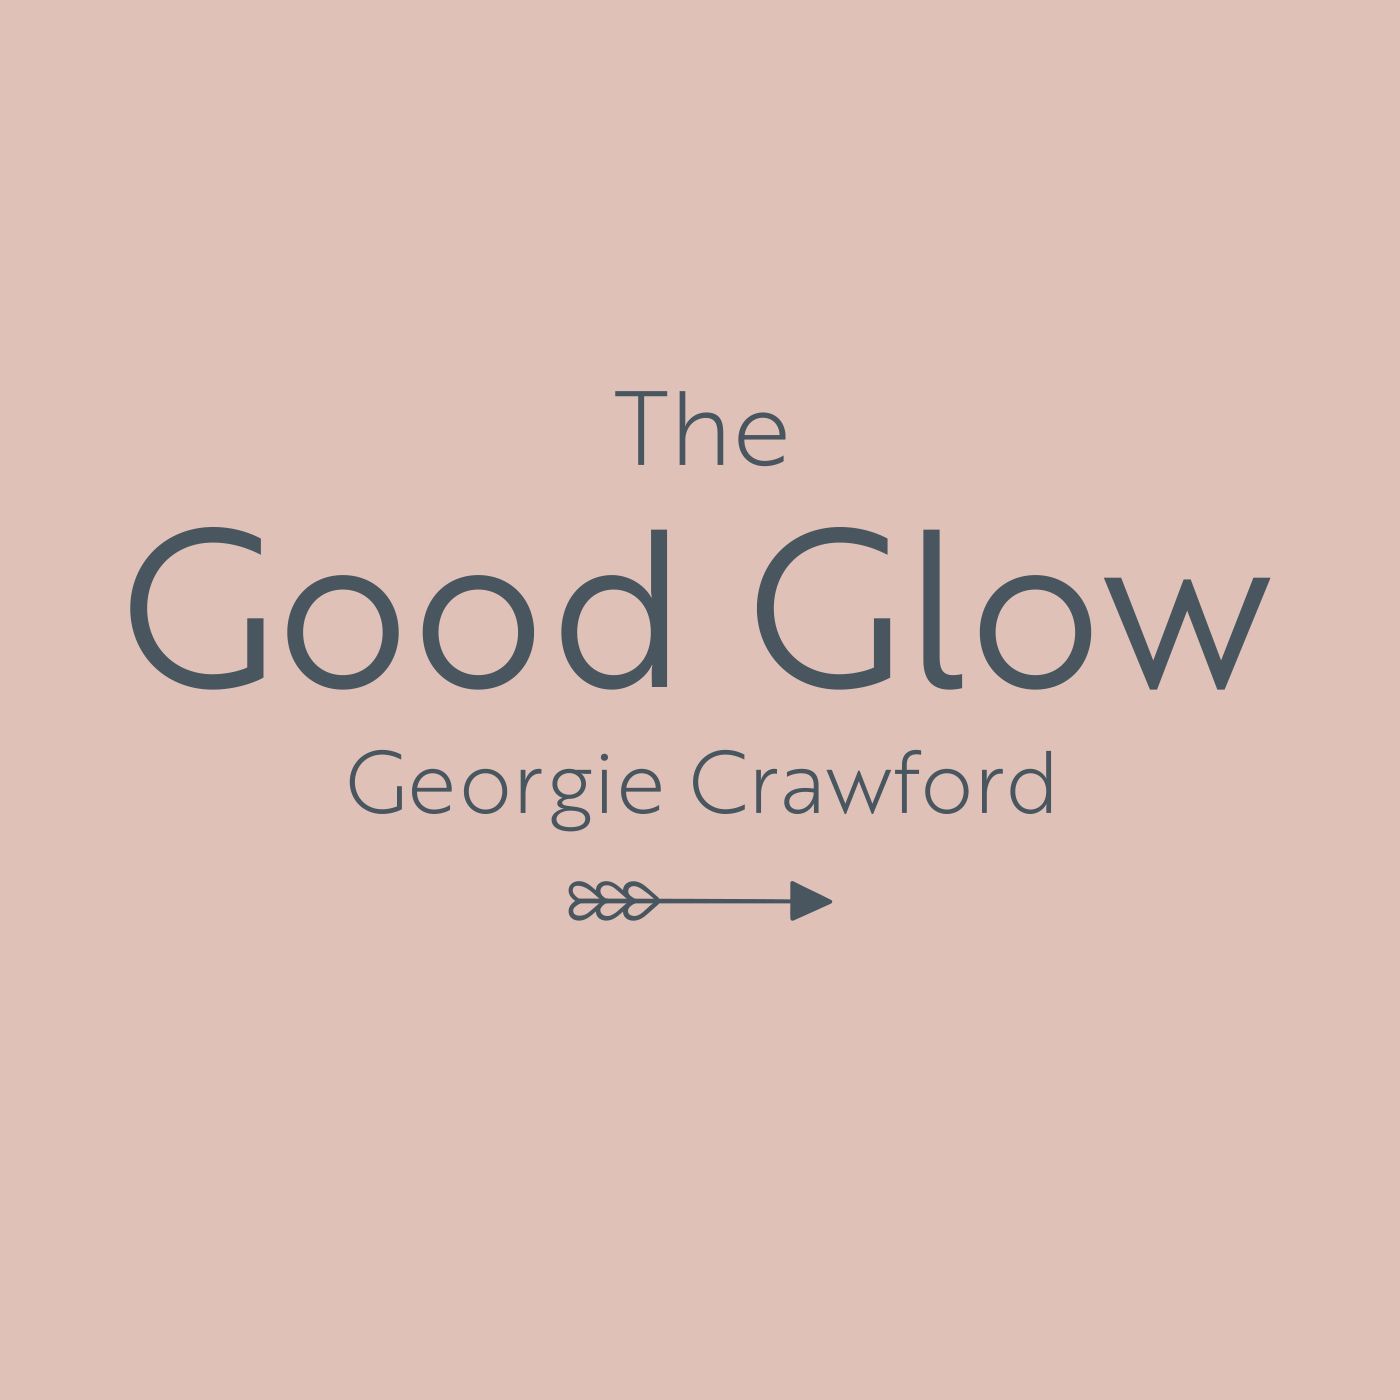 S11 Ep1: The Good Glow - Roz Purcell